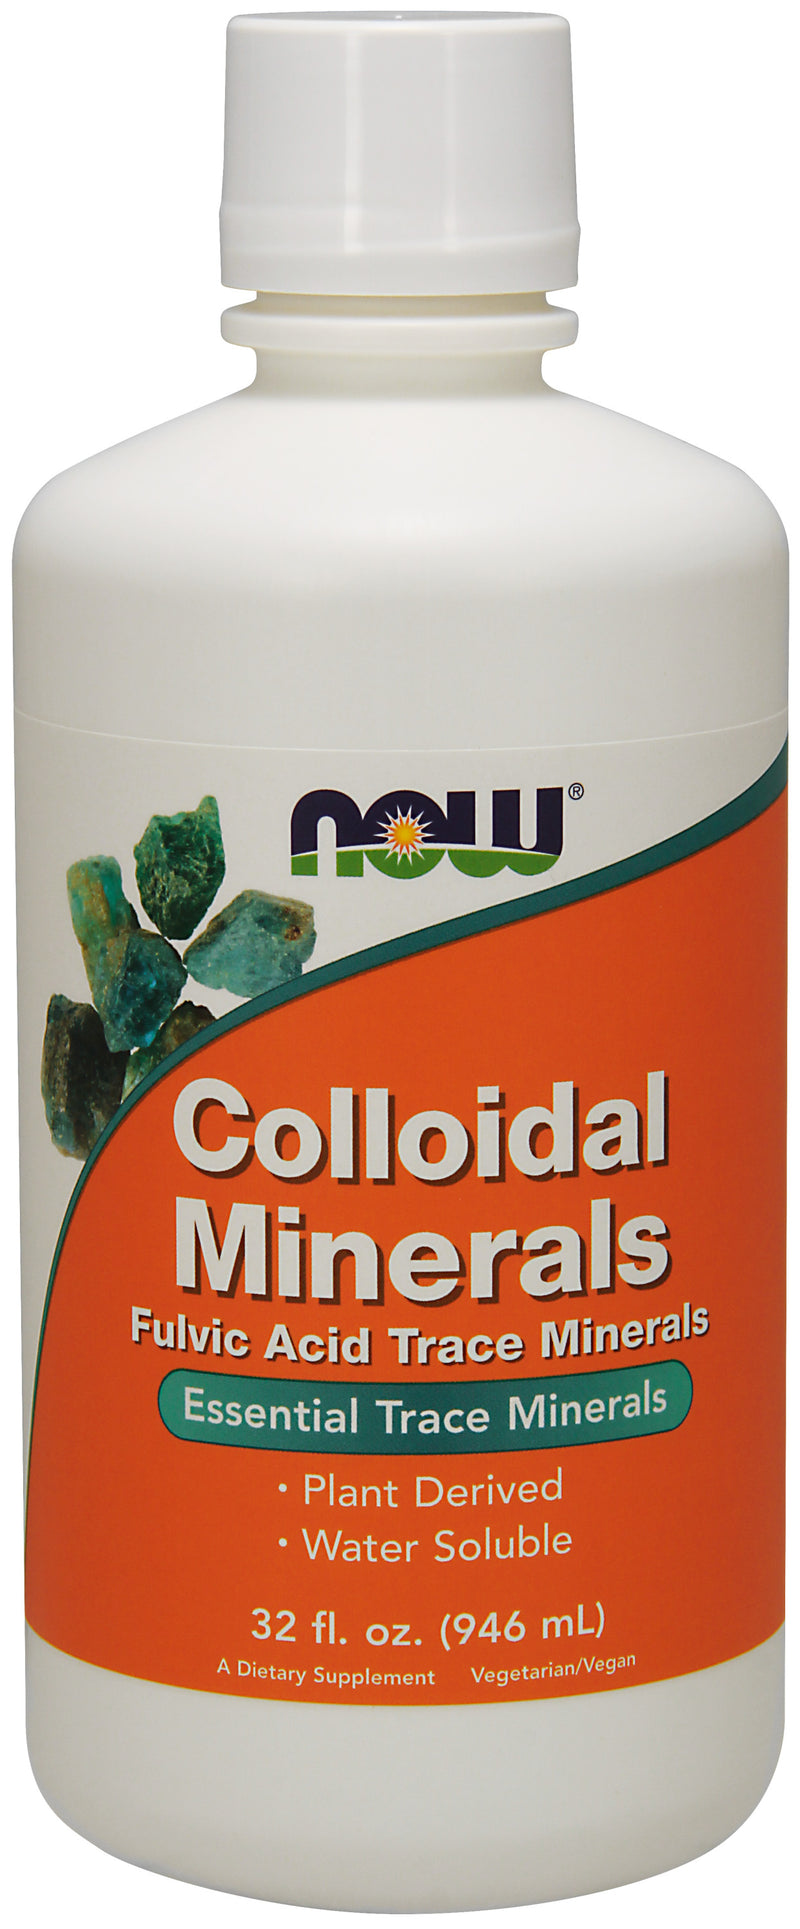 Colloidal Minerals 32 fl oz (946 ml) | By Now Foods - Best Price